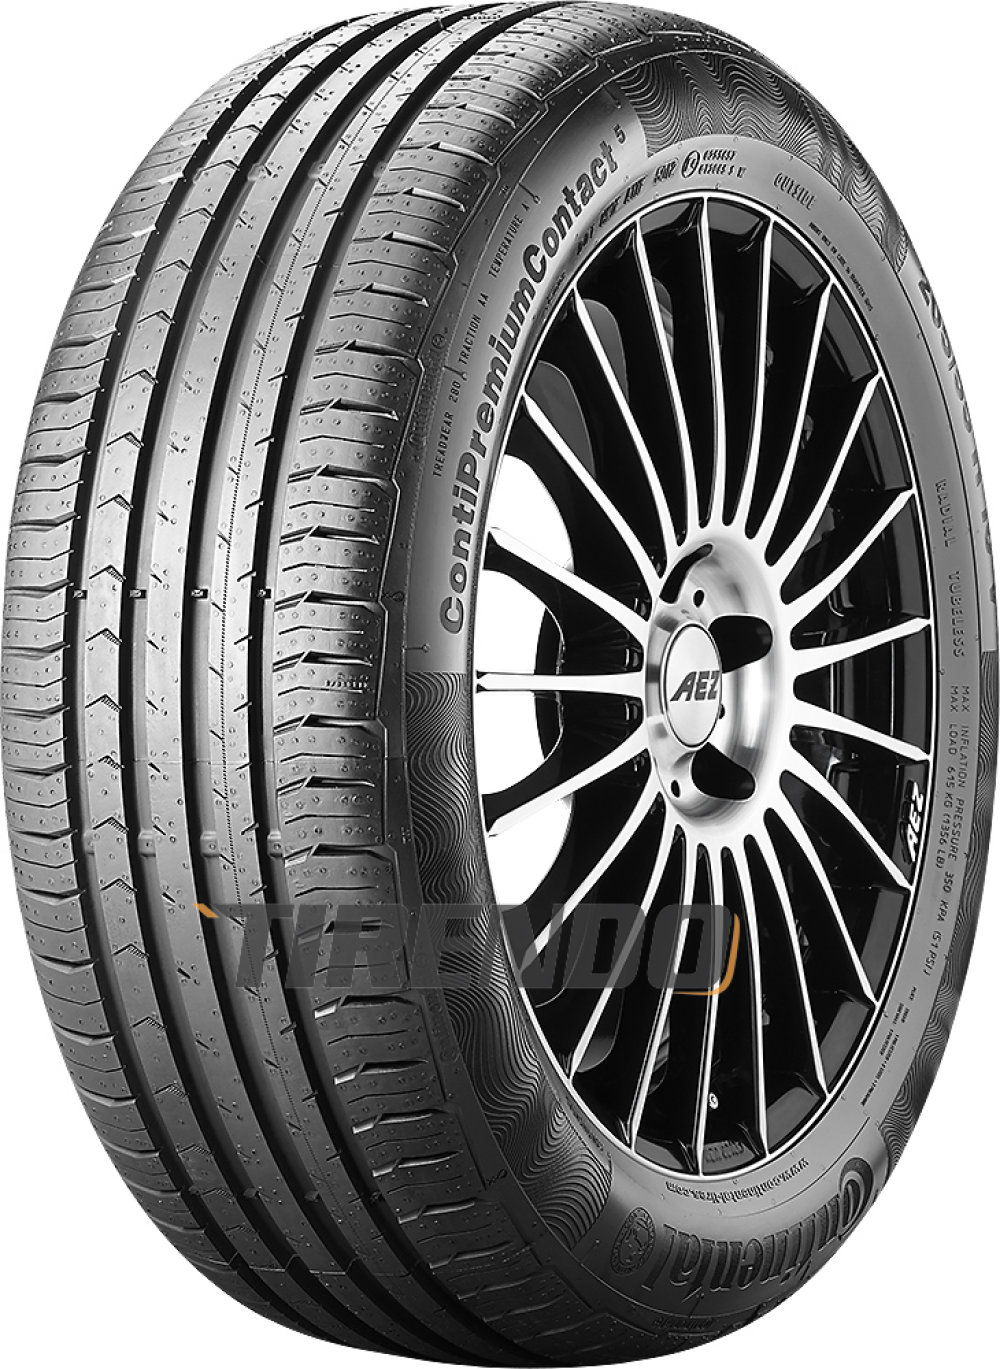 Image of Continental ContiPremiumContact 5 ( 215/70 R16 100H )